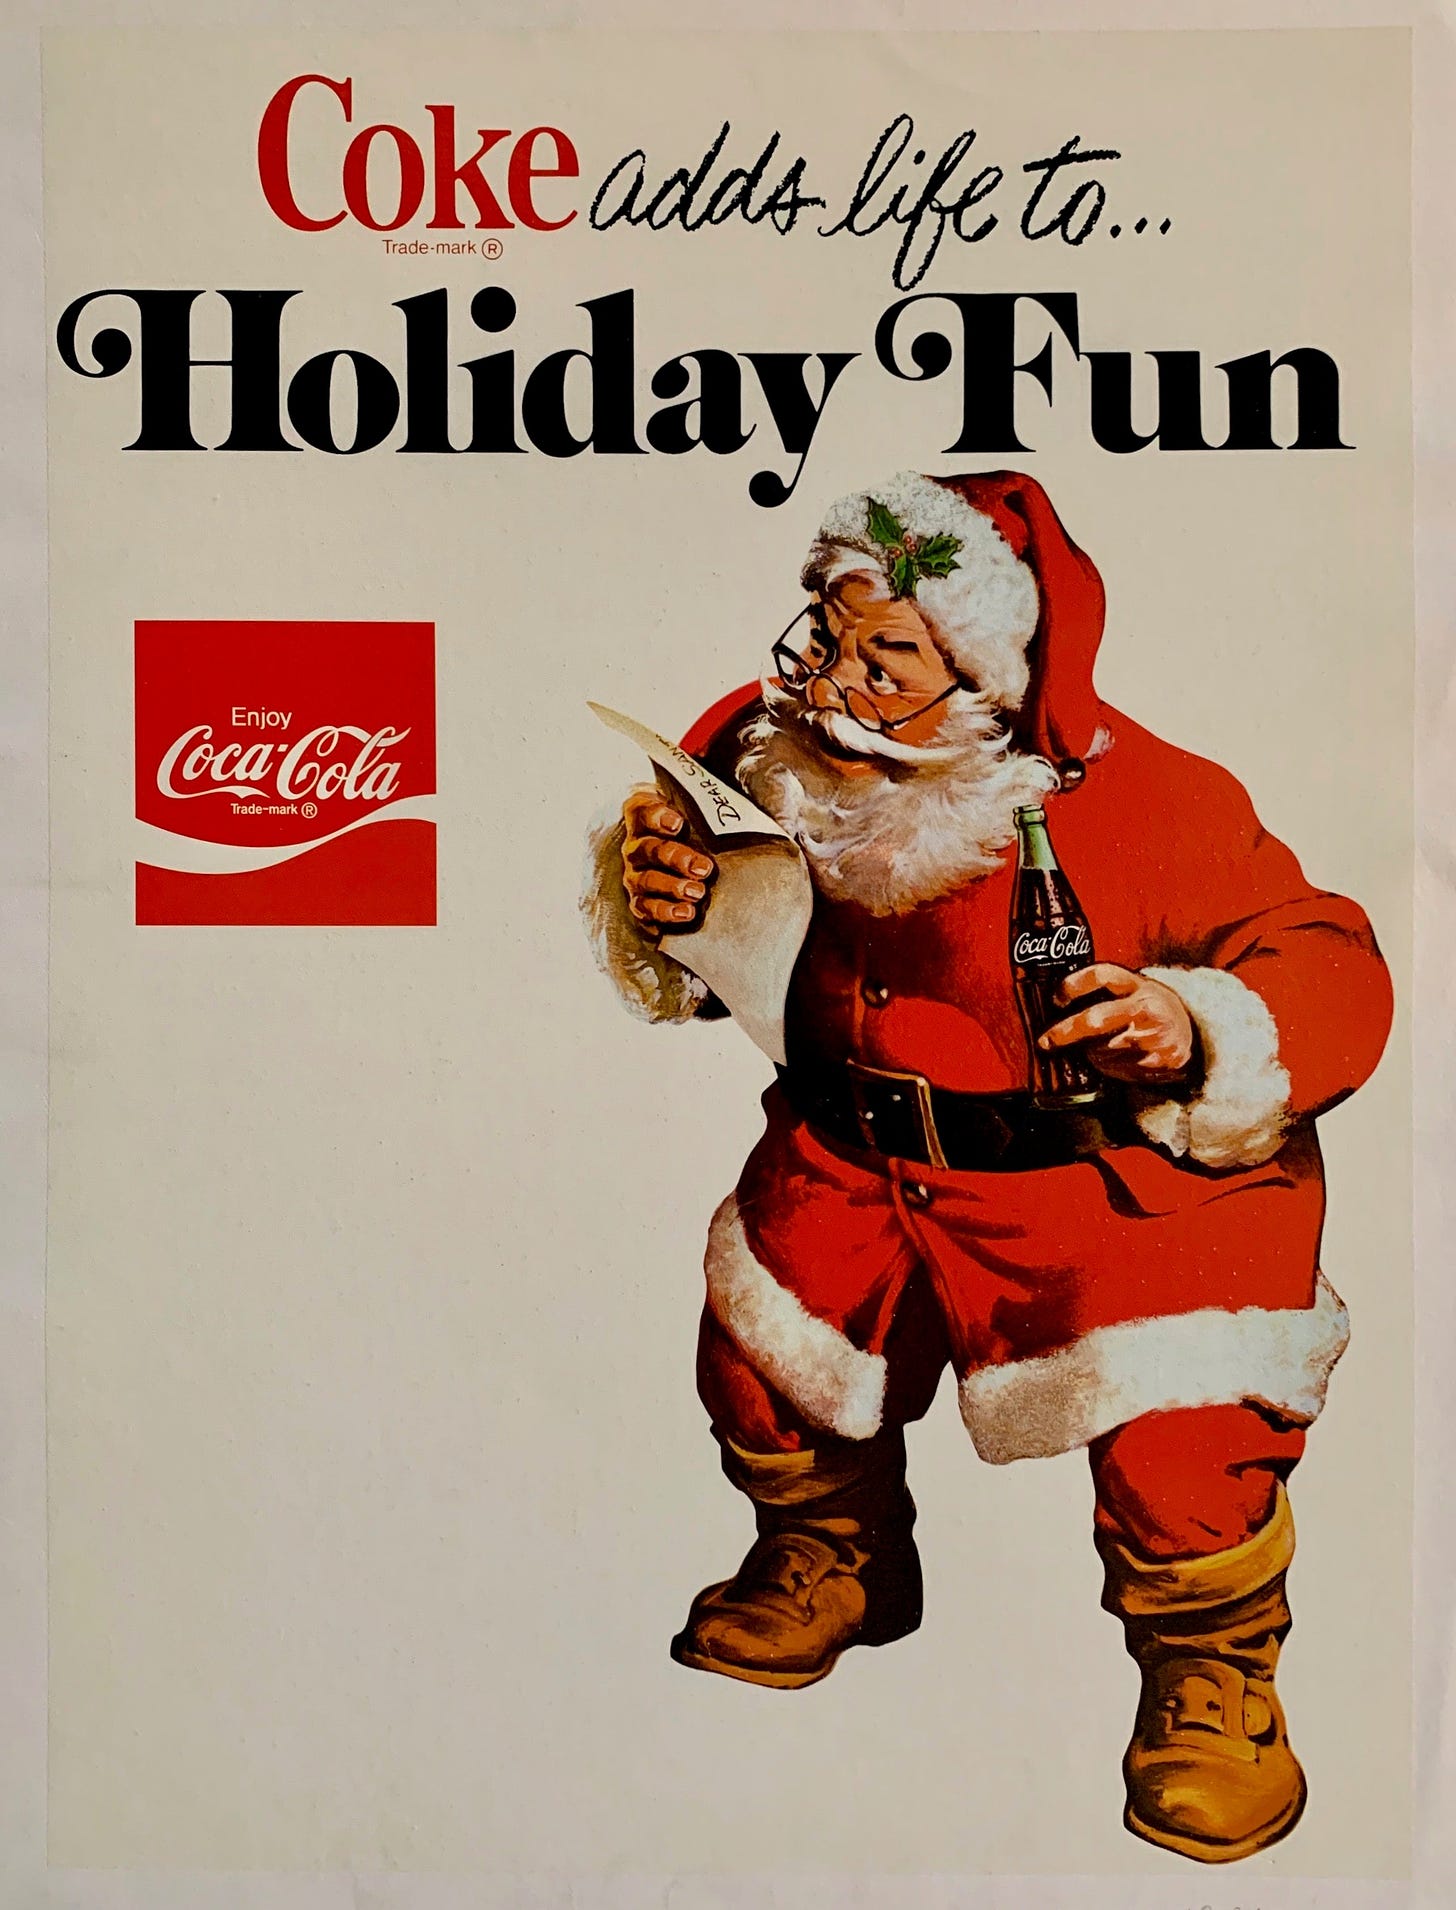 Coke adds life to... Holiday Fun -- Coca Cola – Poster Museum